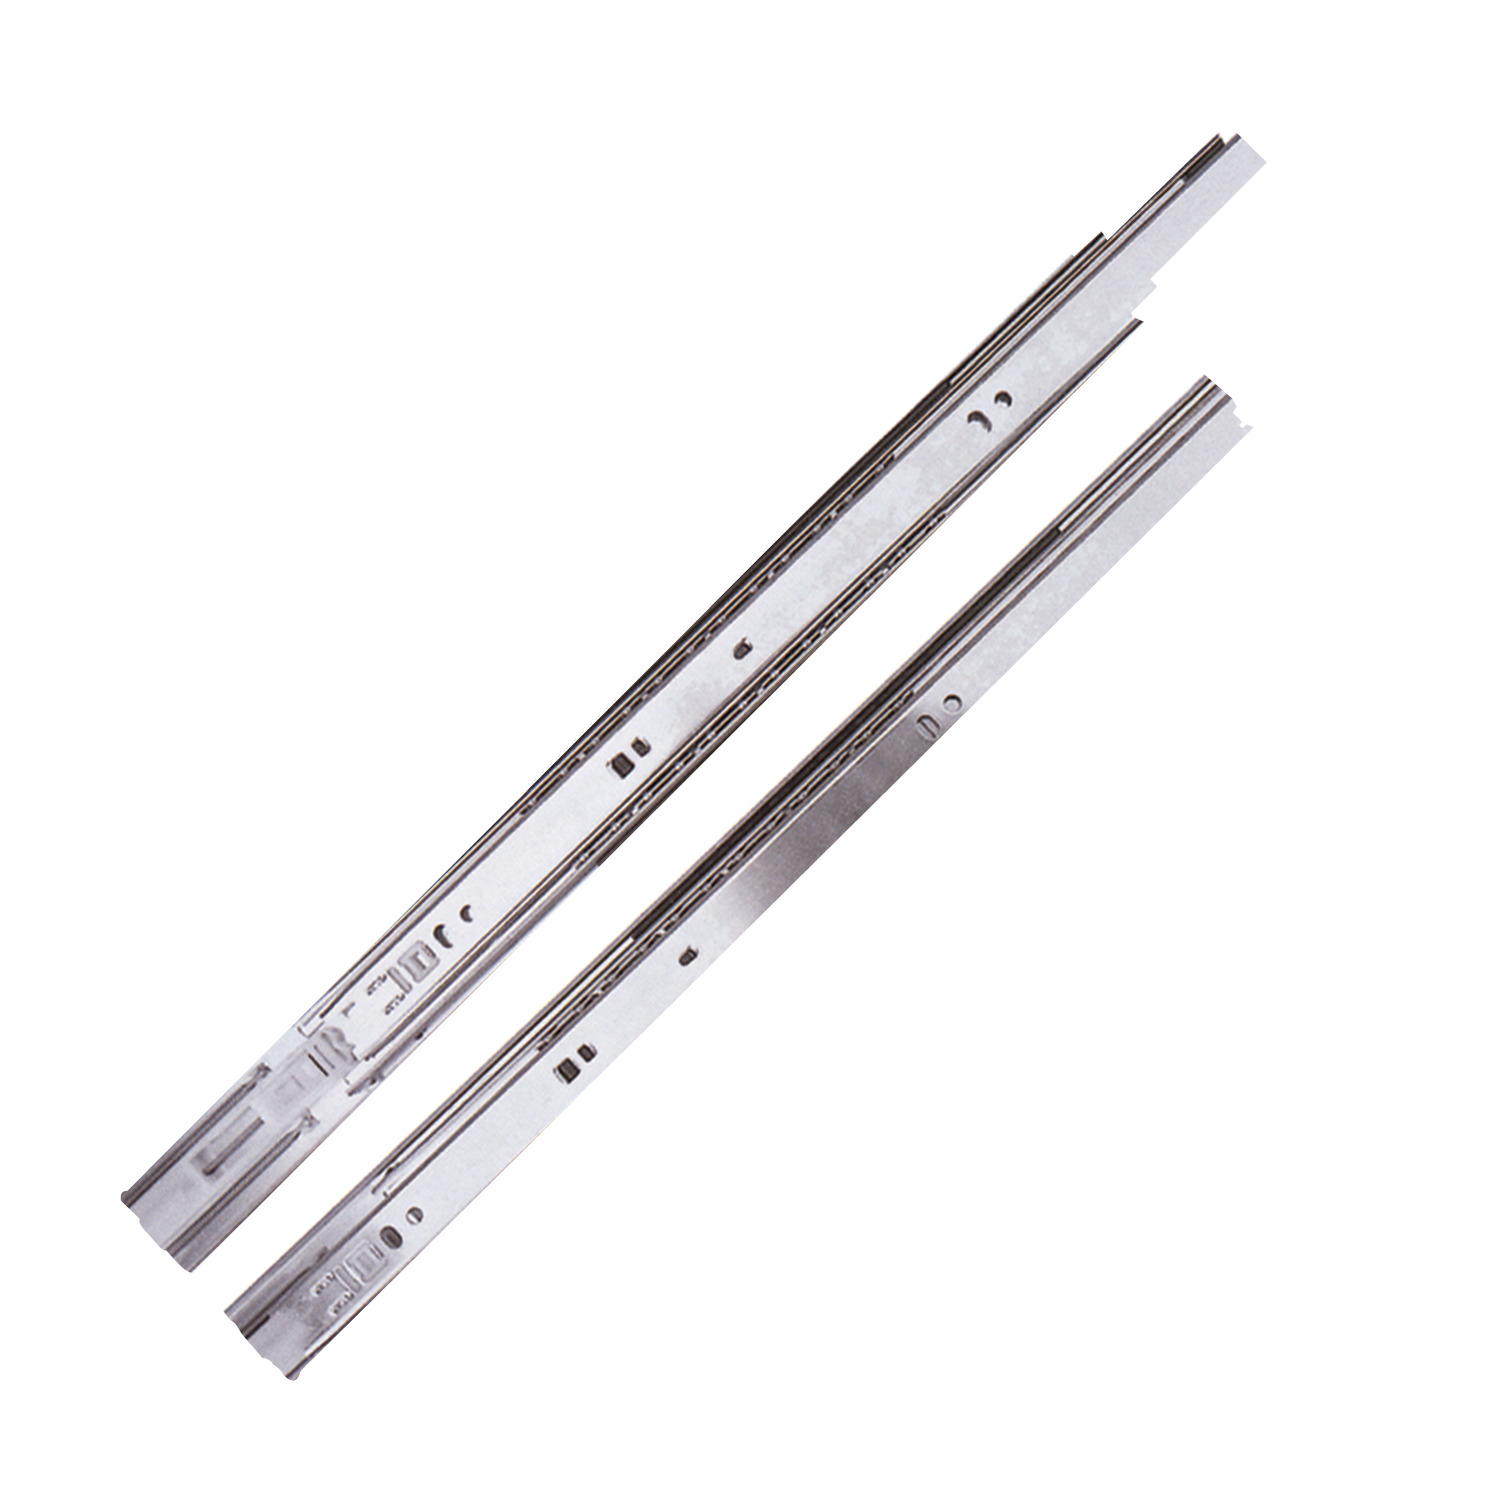 P4080.AC0400 Drawer Slide Full Extn Length 400; Load 30kg per pair. Sold Individually. Lever Disconnect; Soft Close